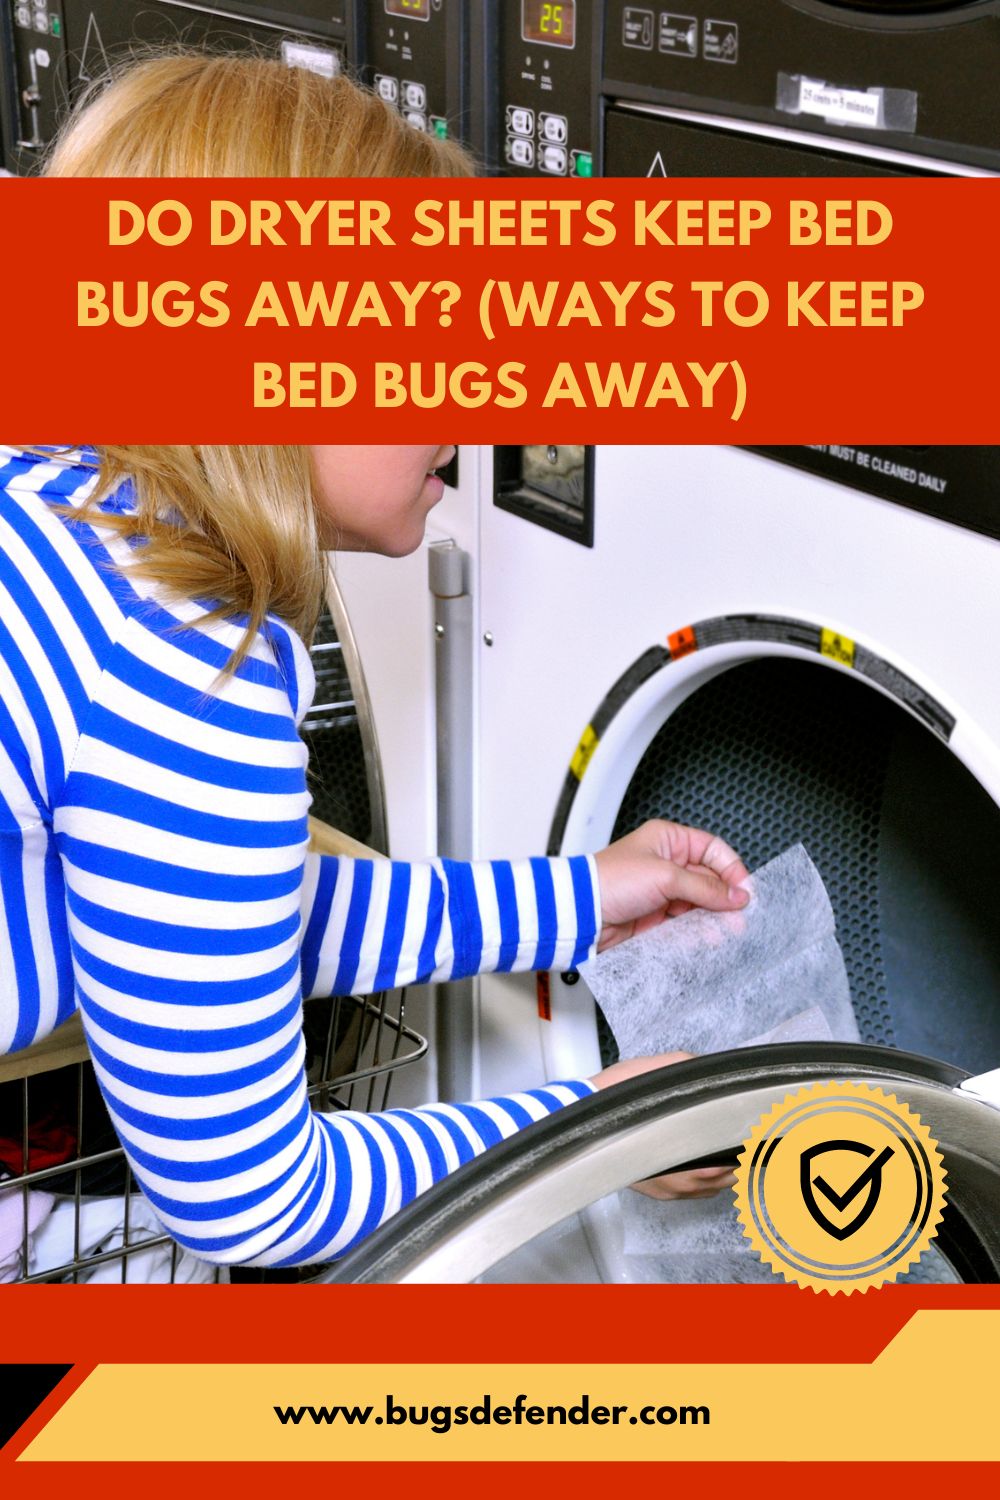 Do Dryer Sheets Keep Bed Bugs Away pin2